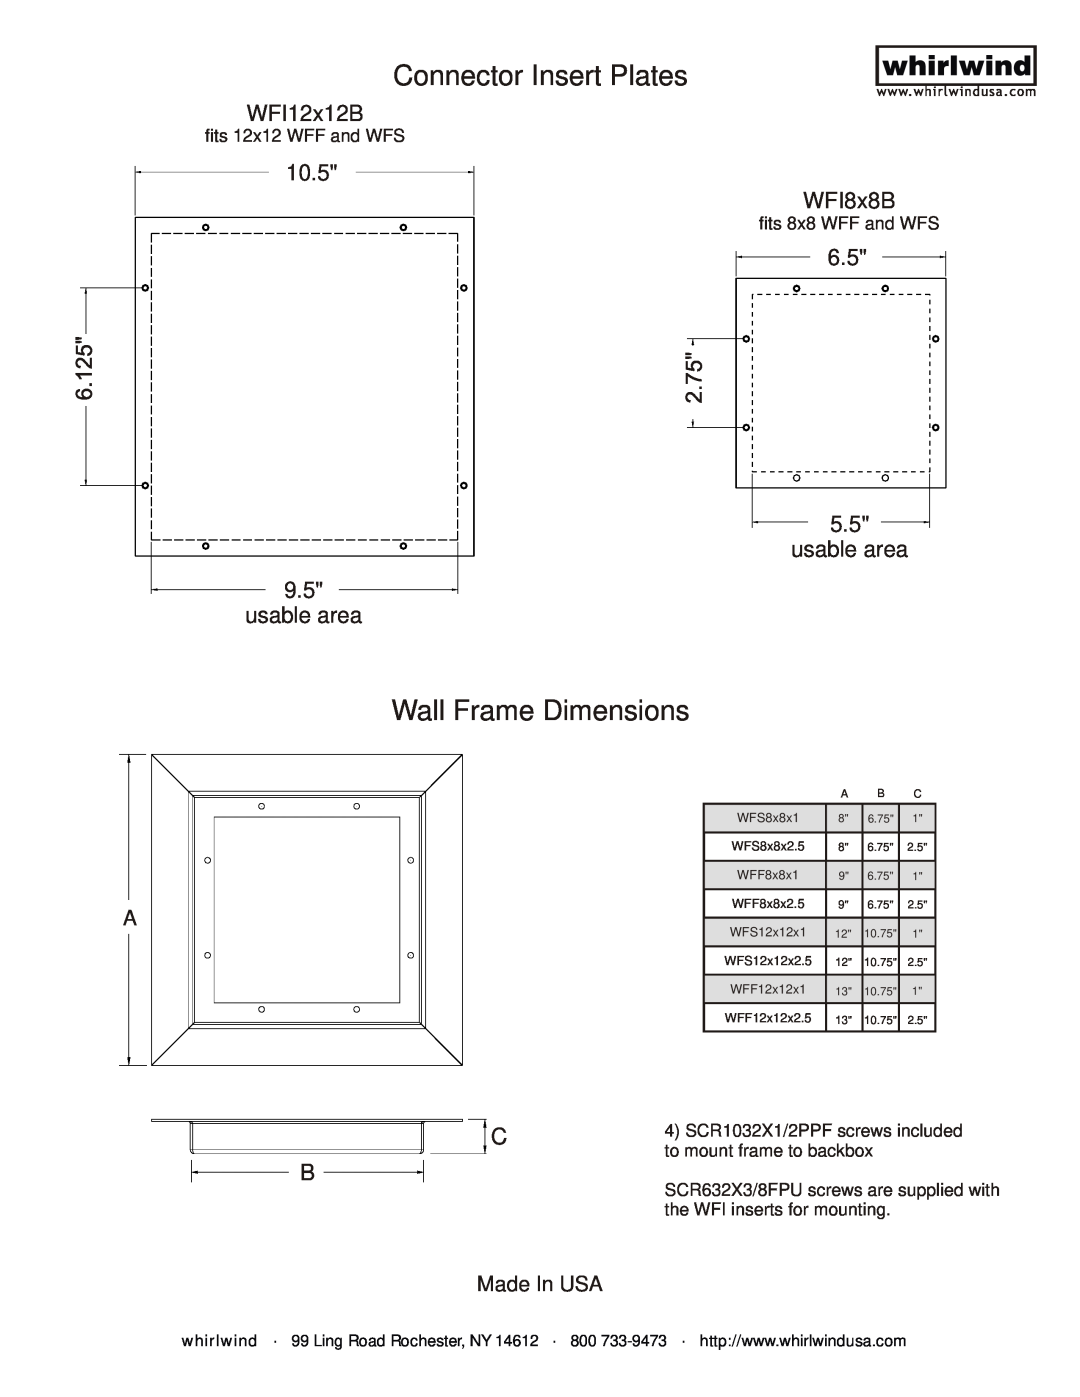 Whirlwind Patent-Pending Recessed Wall Frames Connector Insert Plates, Wall Frame Dimensions, WFI12x12B, WFI8x8B, WFS8x8x1 